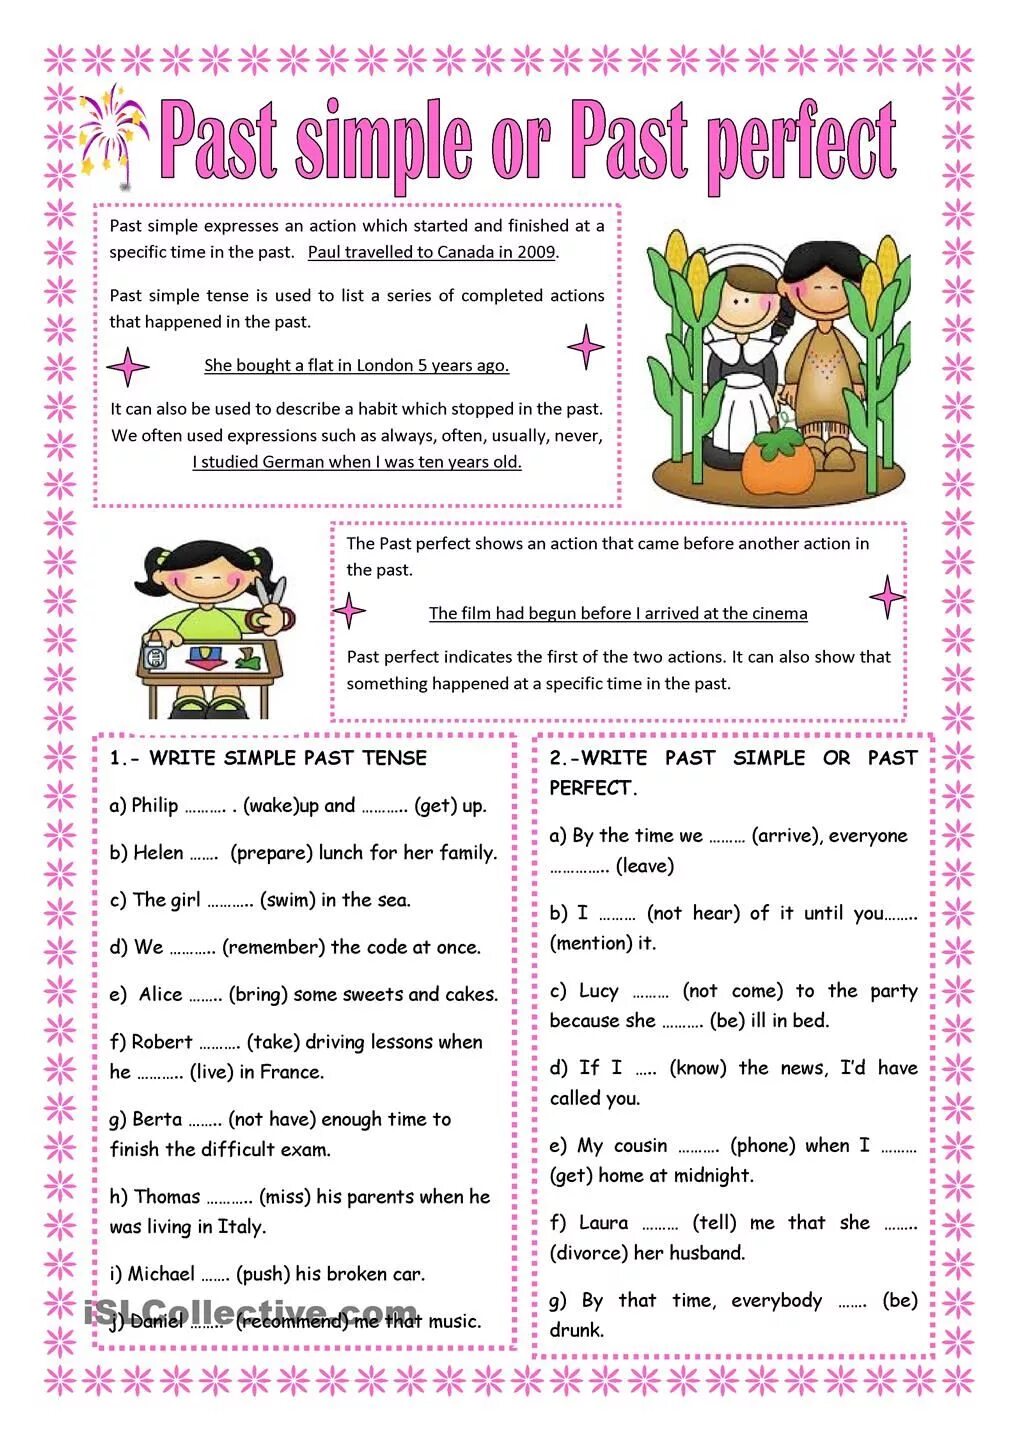 Past simple vs past perfect Worksheets. Present perfect vs past simple exercise. Present perfect past simple упражнения. Past simple past perfect упражнения Worksheets. Past simple or present perfect exercises